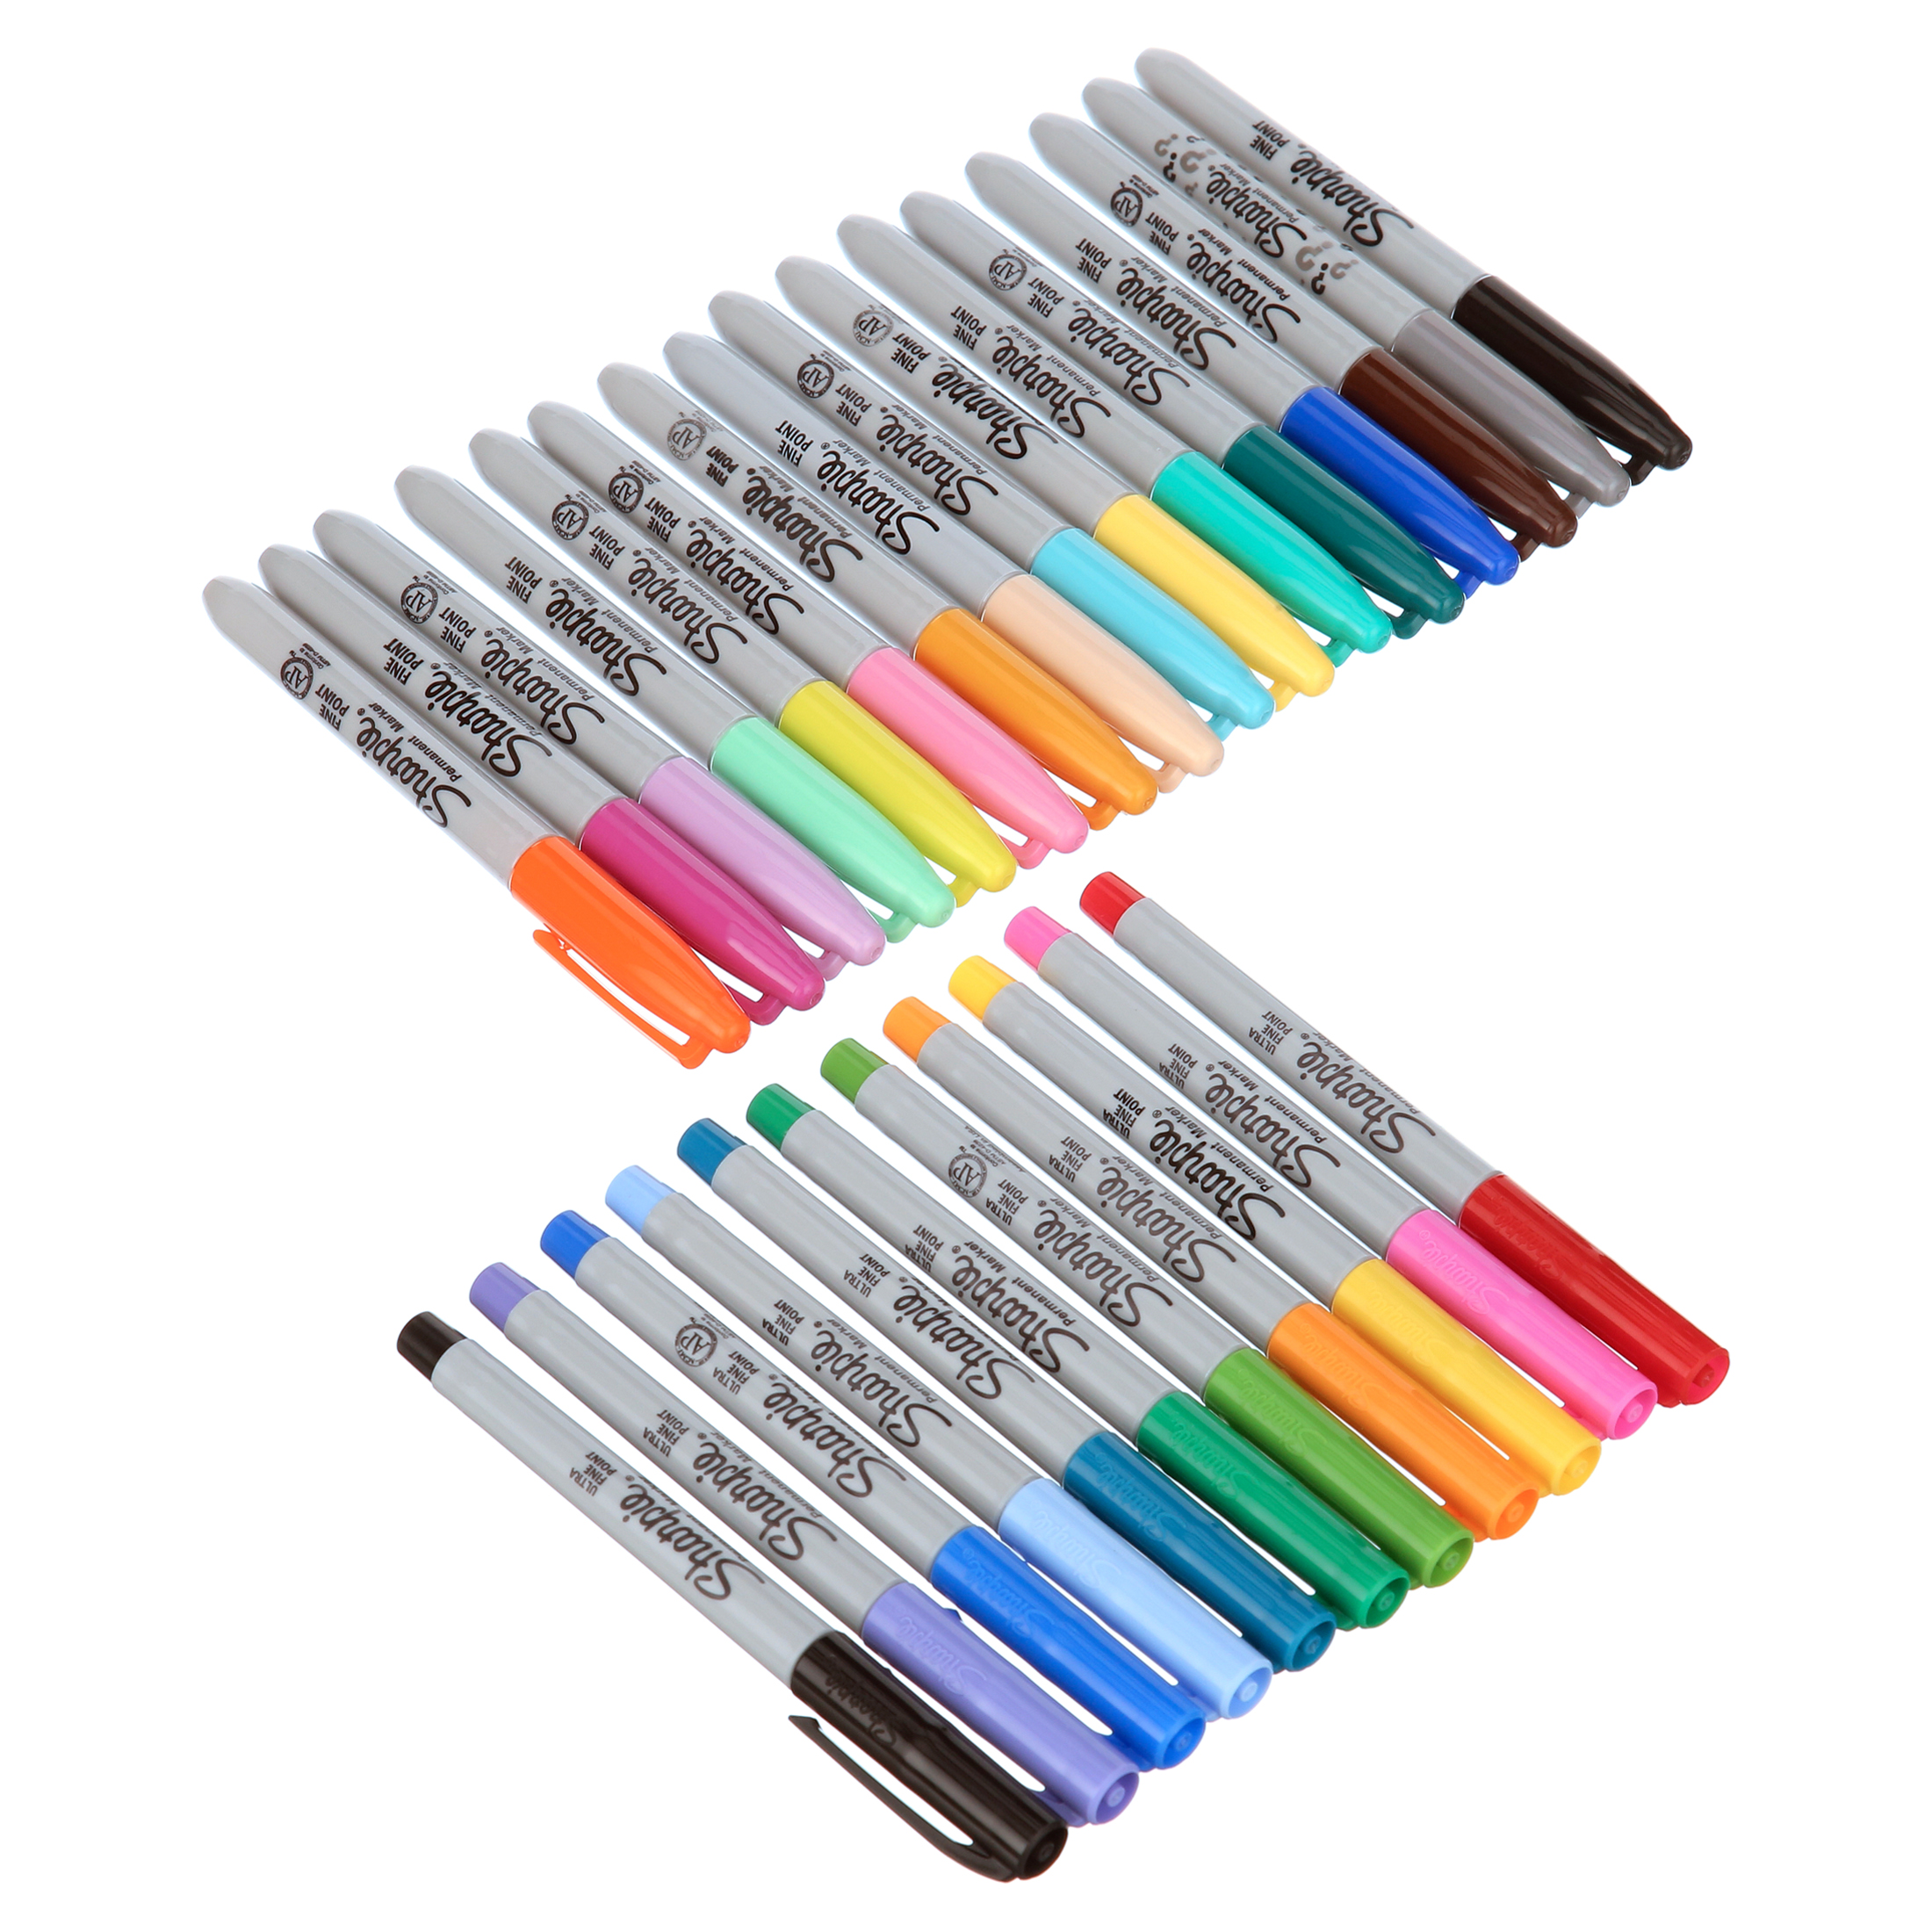 Sharpie Permanent Marker Assorted Pack, Plus 1 Mystery Color, Special Edition, 30 Count - image 1 of 7